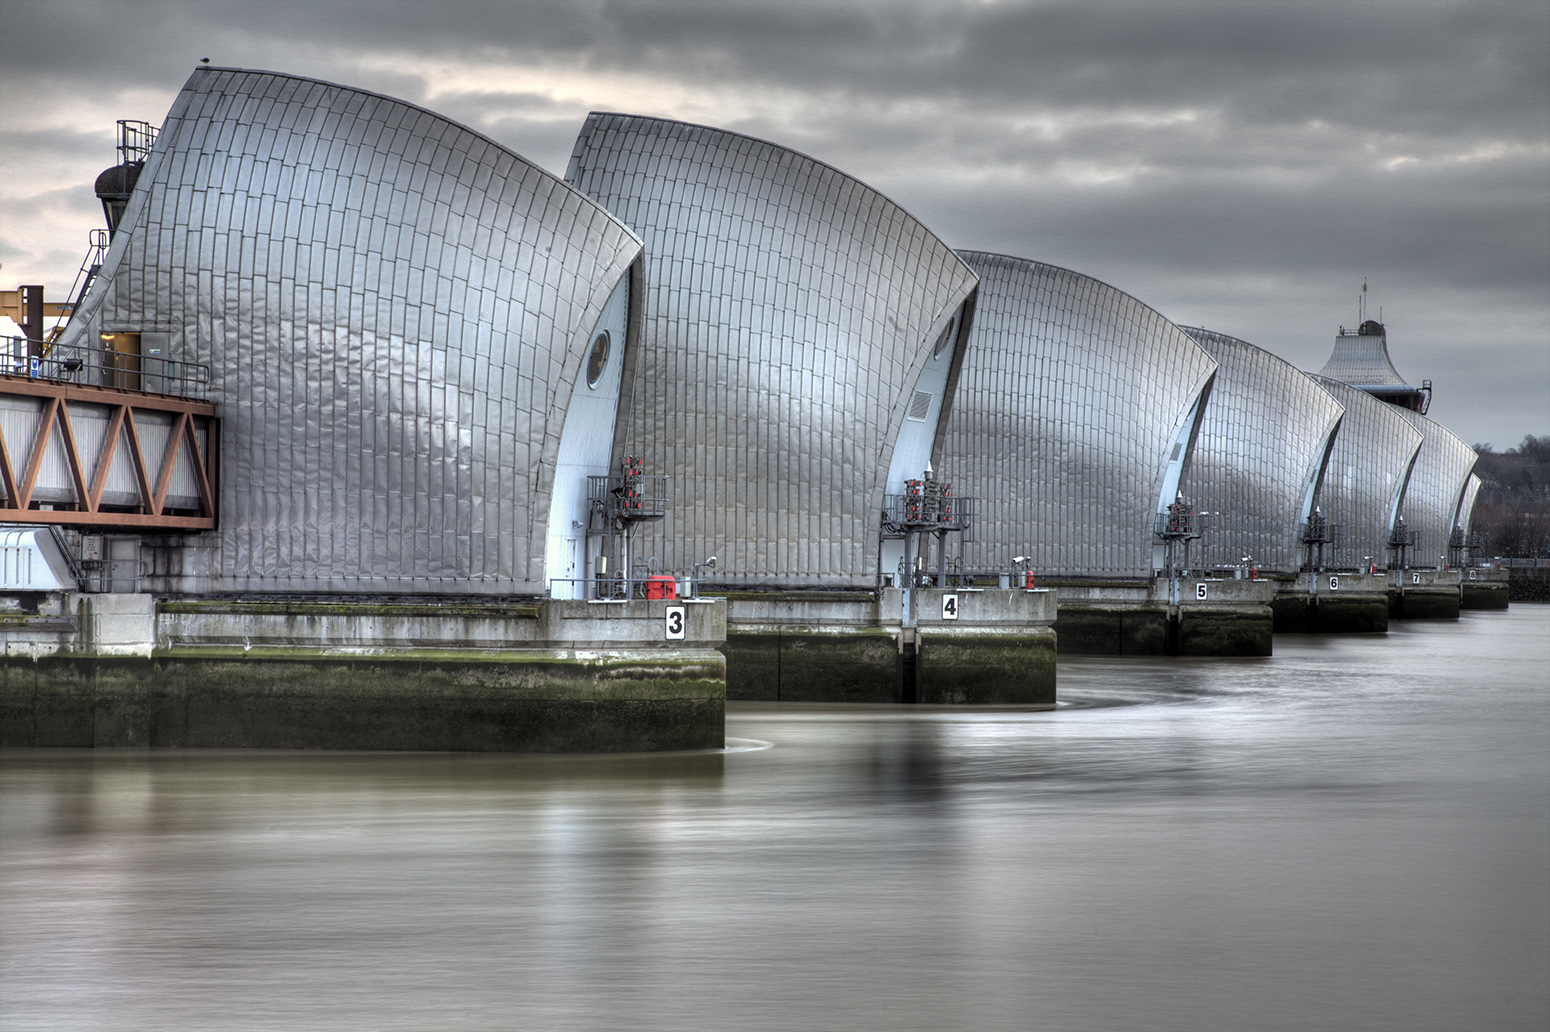 Thames Barrier S Extraordinary Year Prompts Government To Reconsider Long Term Flood Plans Carbon Brief